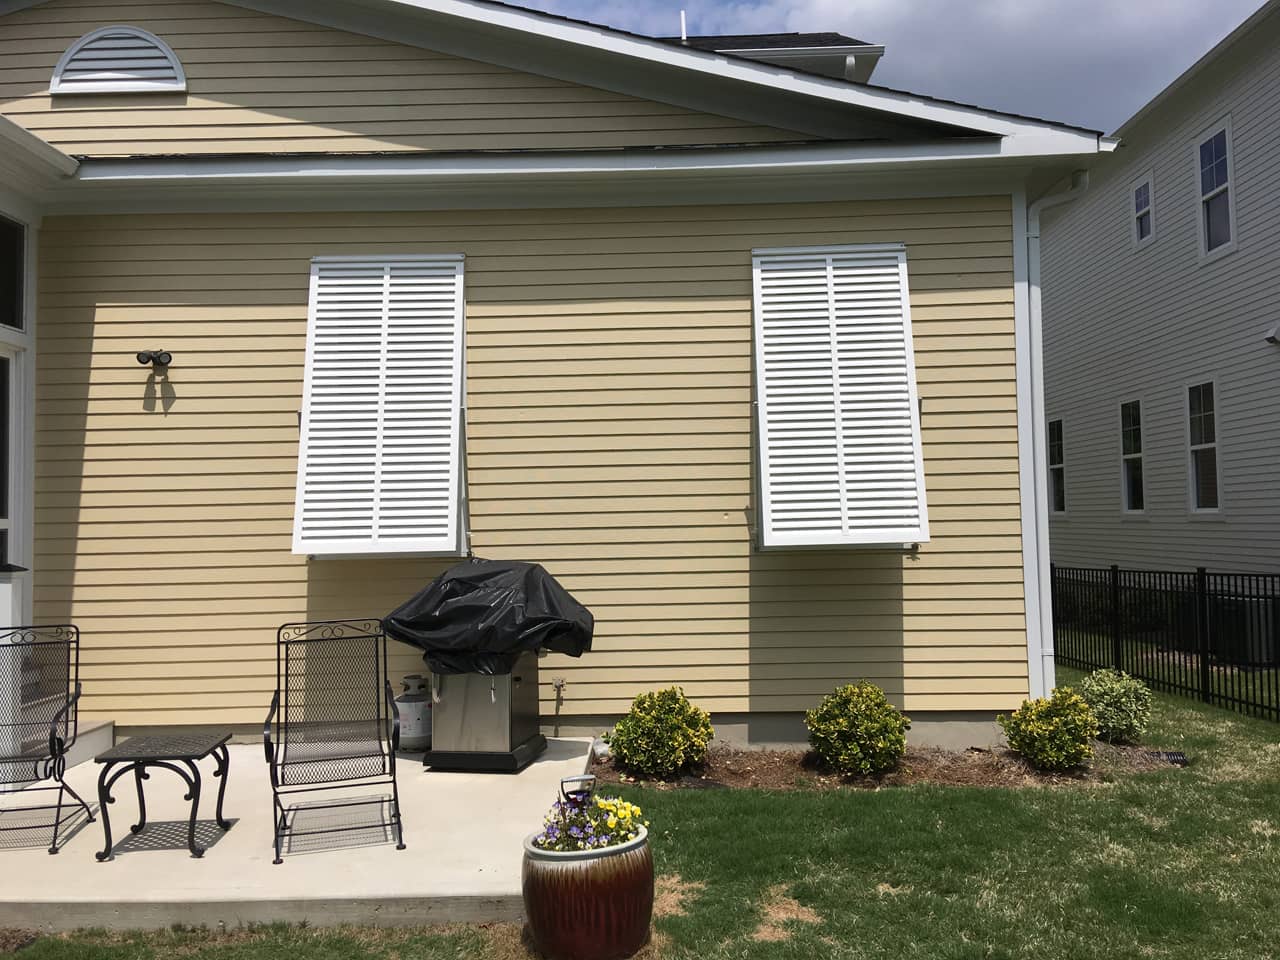 Bahama shutters on house with patio